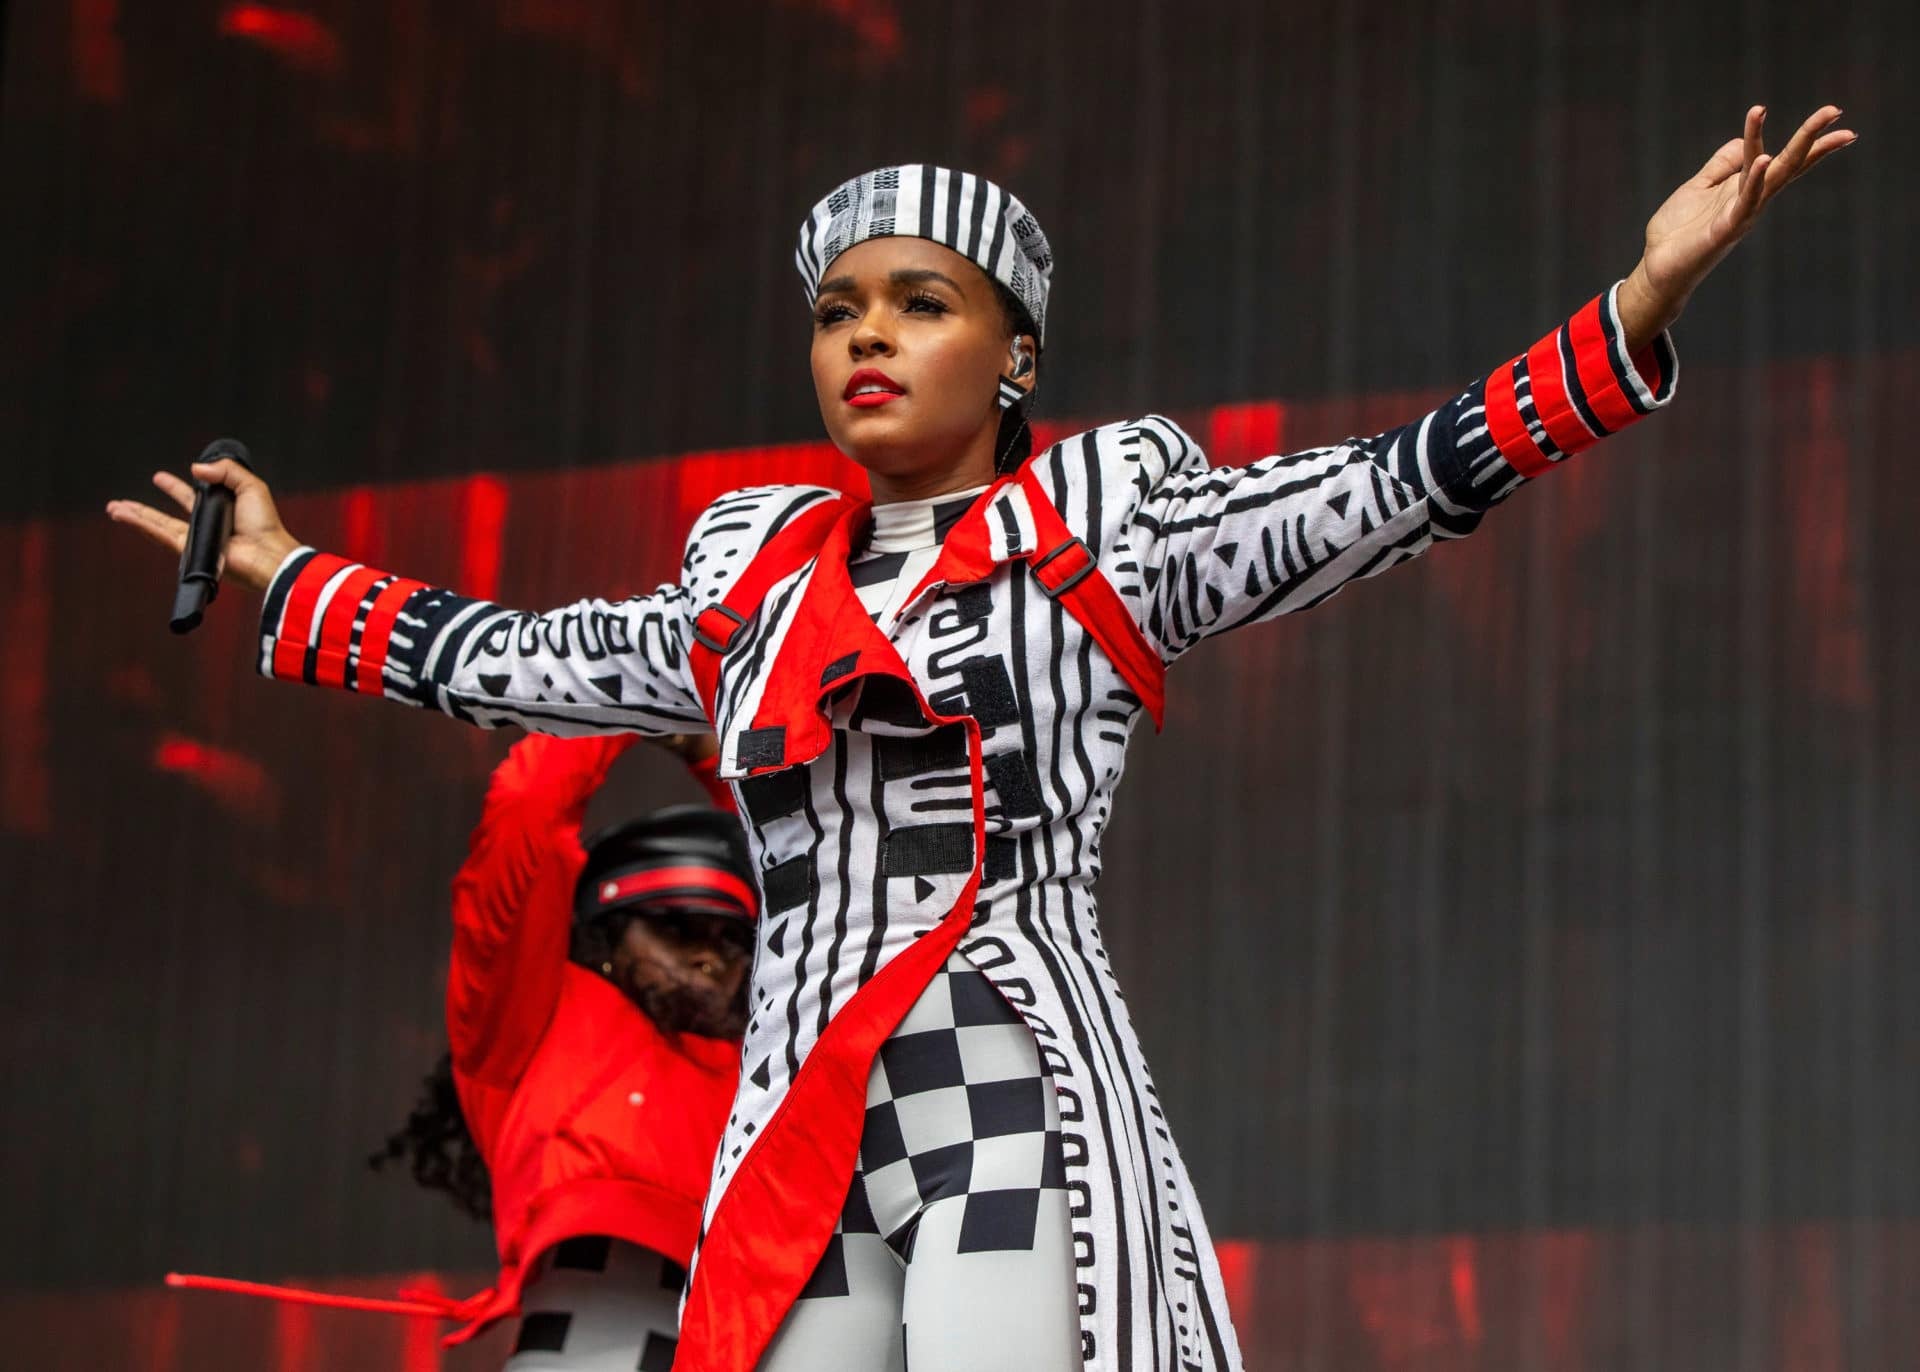 Janelle Monae Speaks On The Importance Of Voting And Georgia's Voter Purge